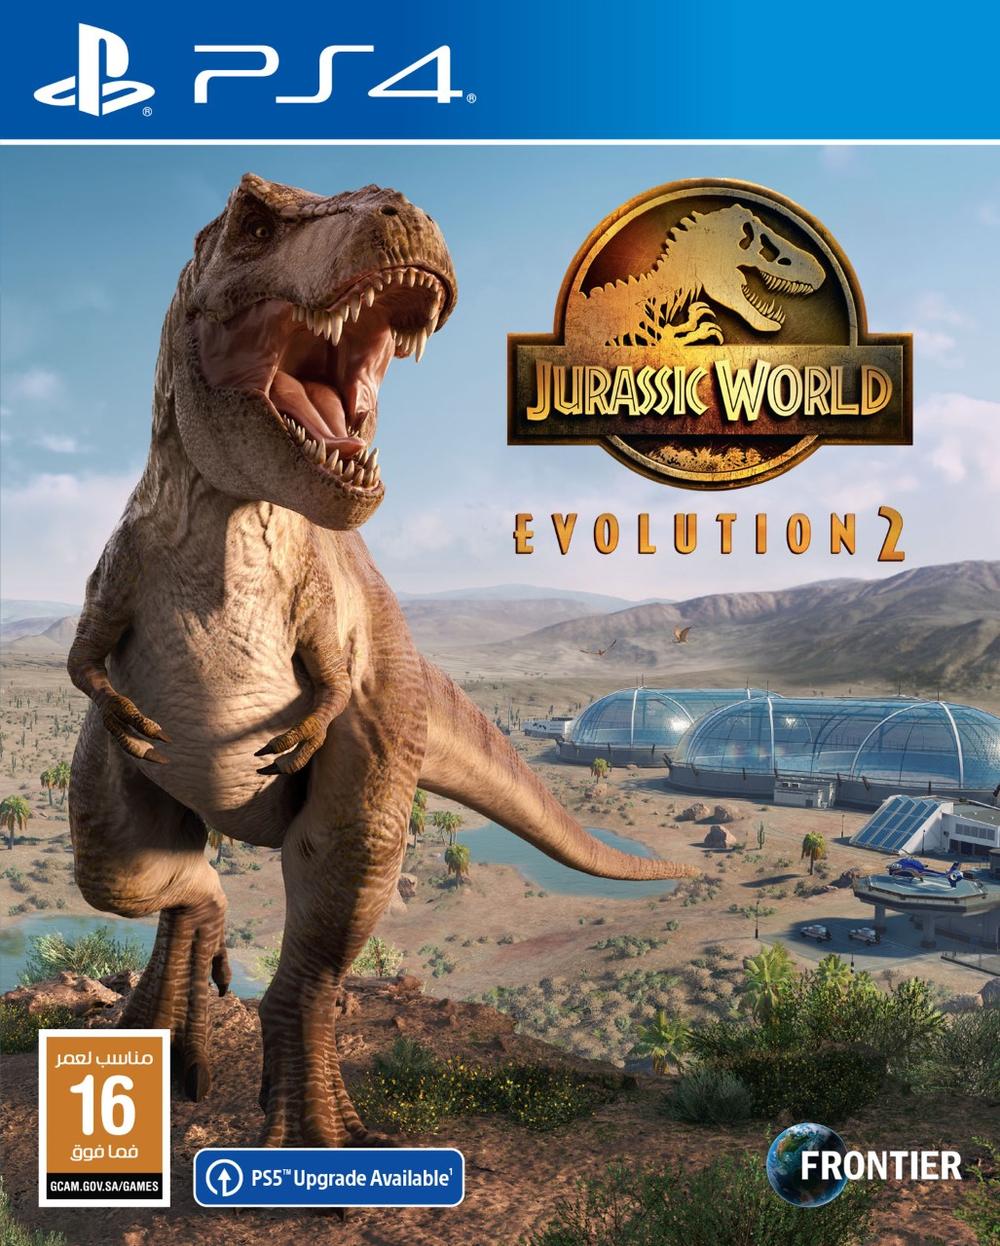 buy-playstation-game-jurassic-world-evolution-2-ps4-with-the-lowest-prices-la3eb-game-store